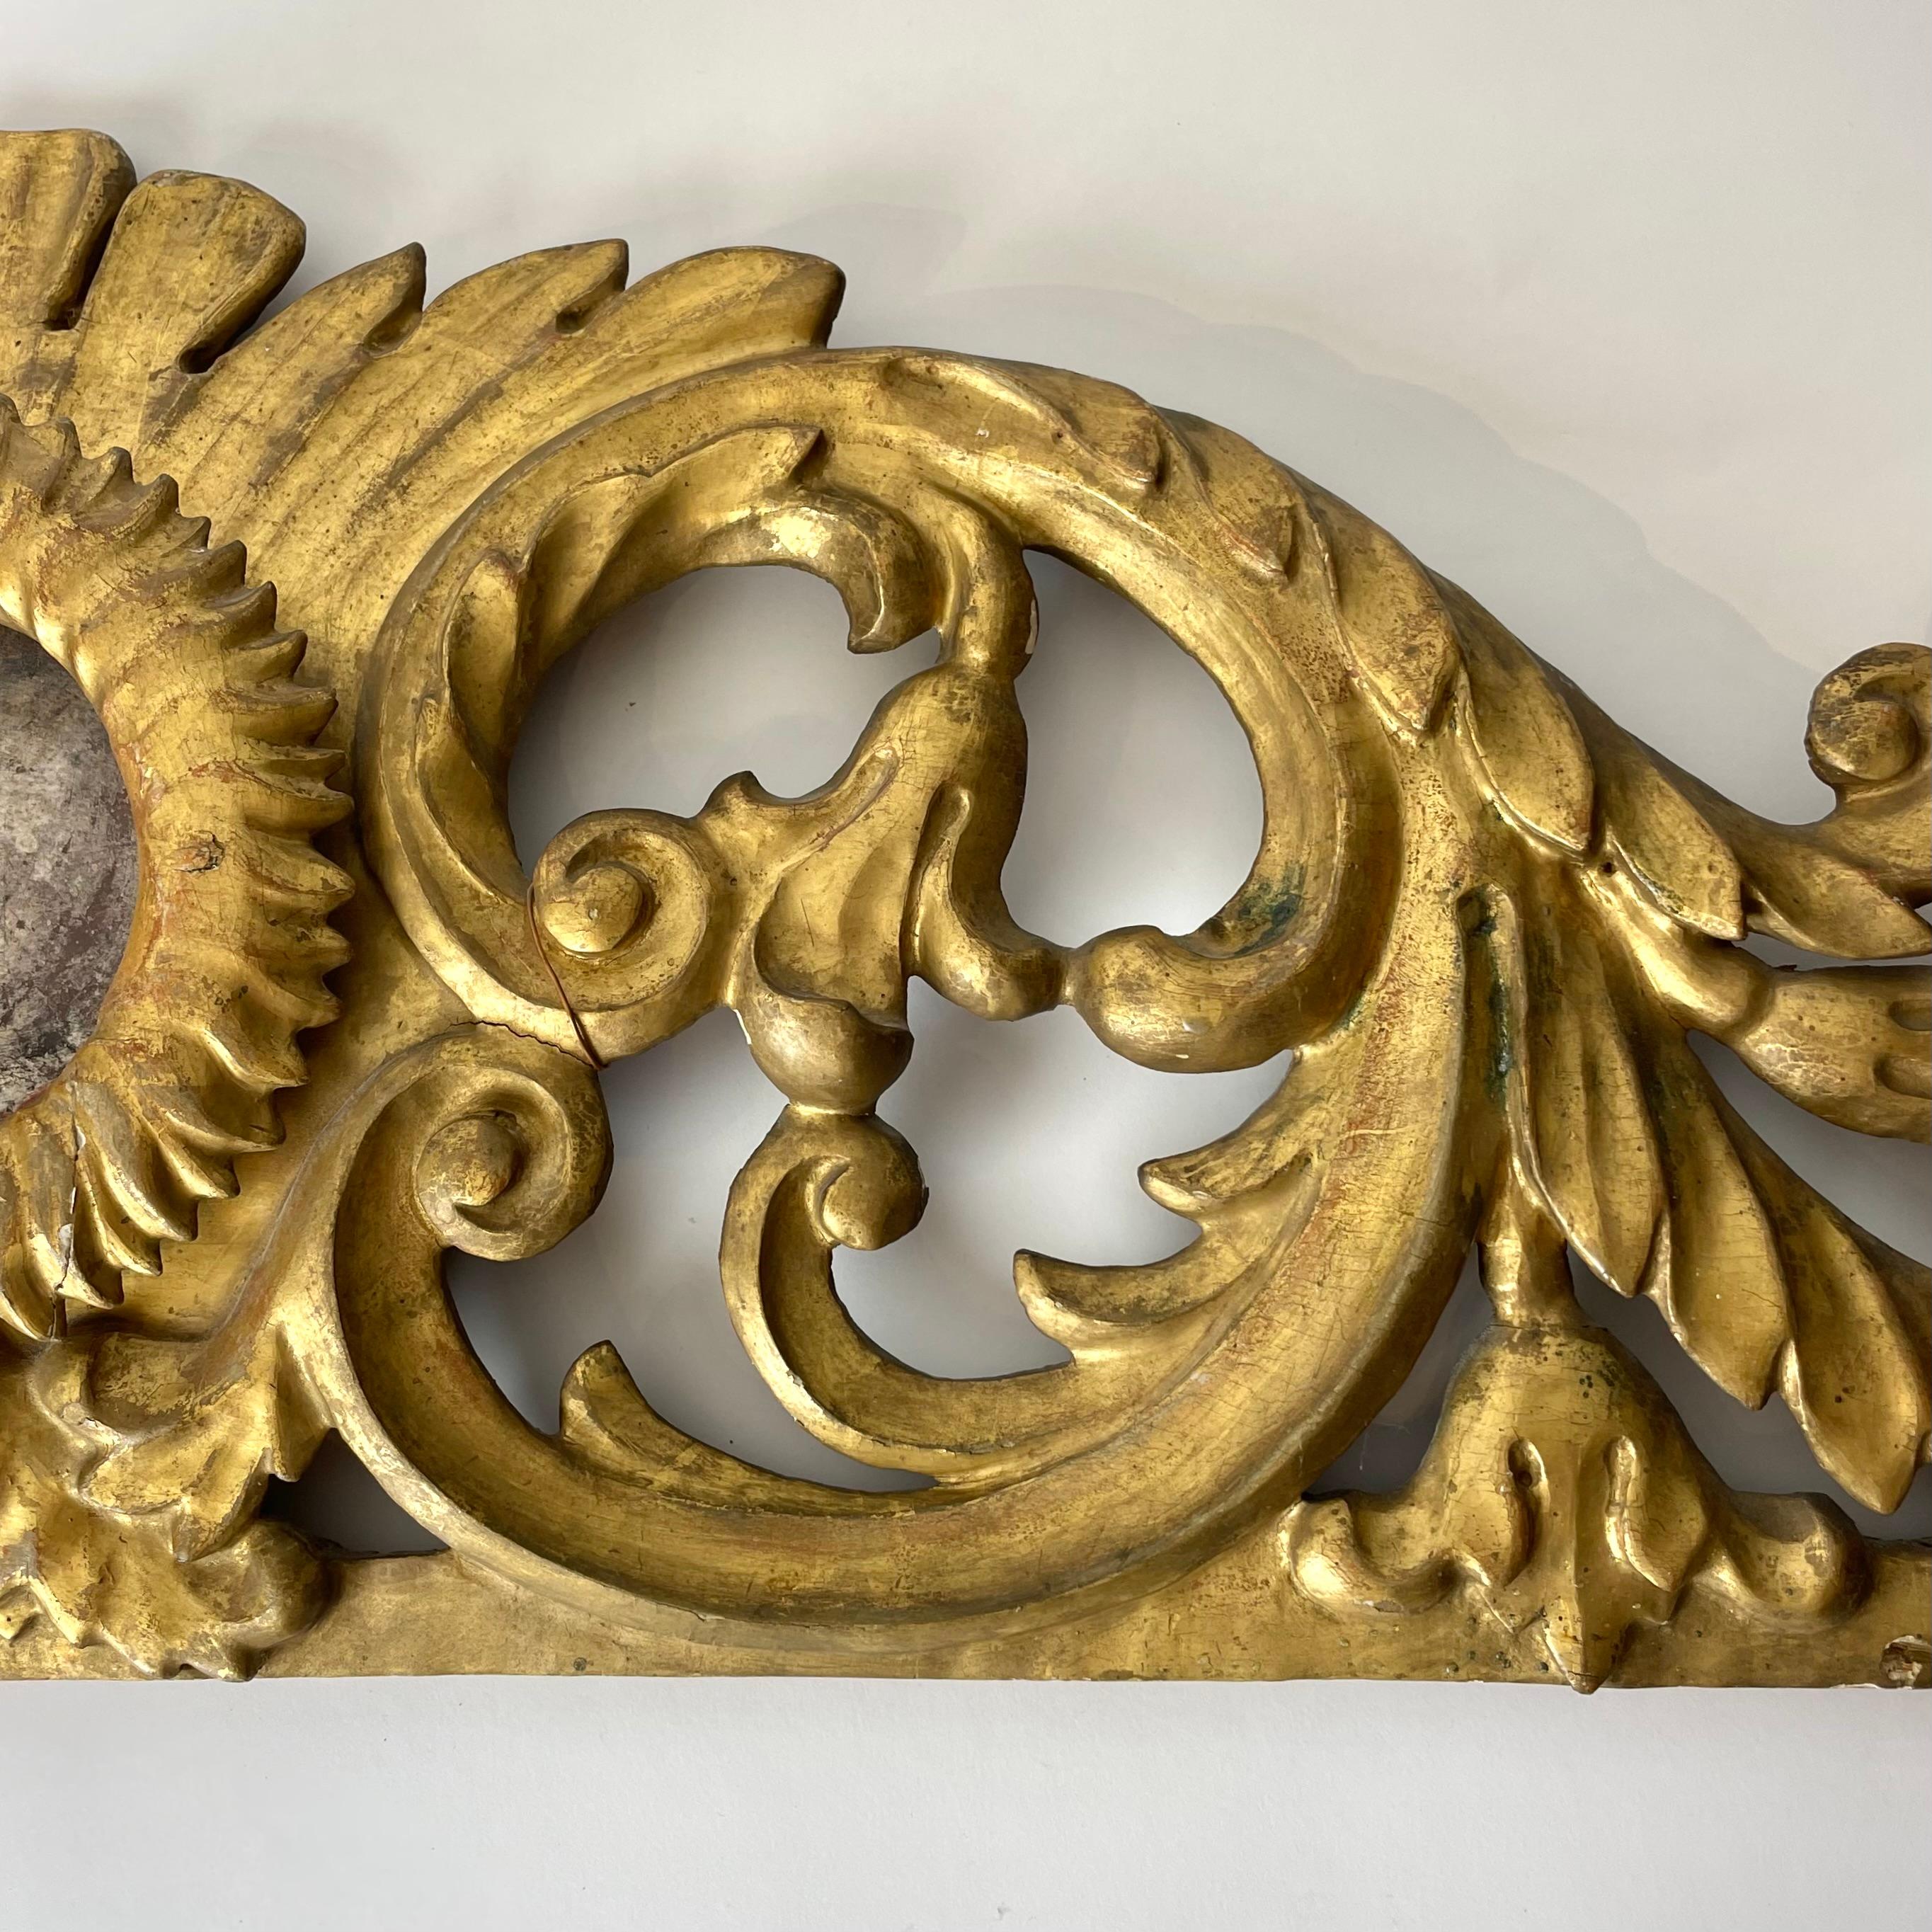 Decorative Door Moulding Architrave Gilt and Silvered Wood Panel, 18th Century In Good Condition For Sale In Knivsta, SE